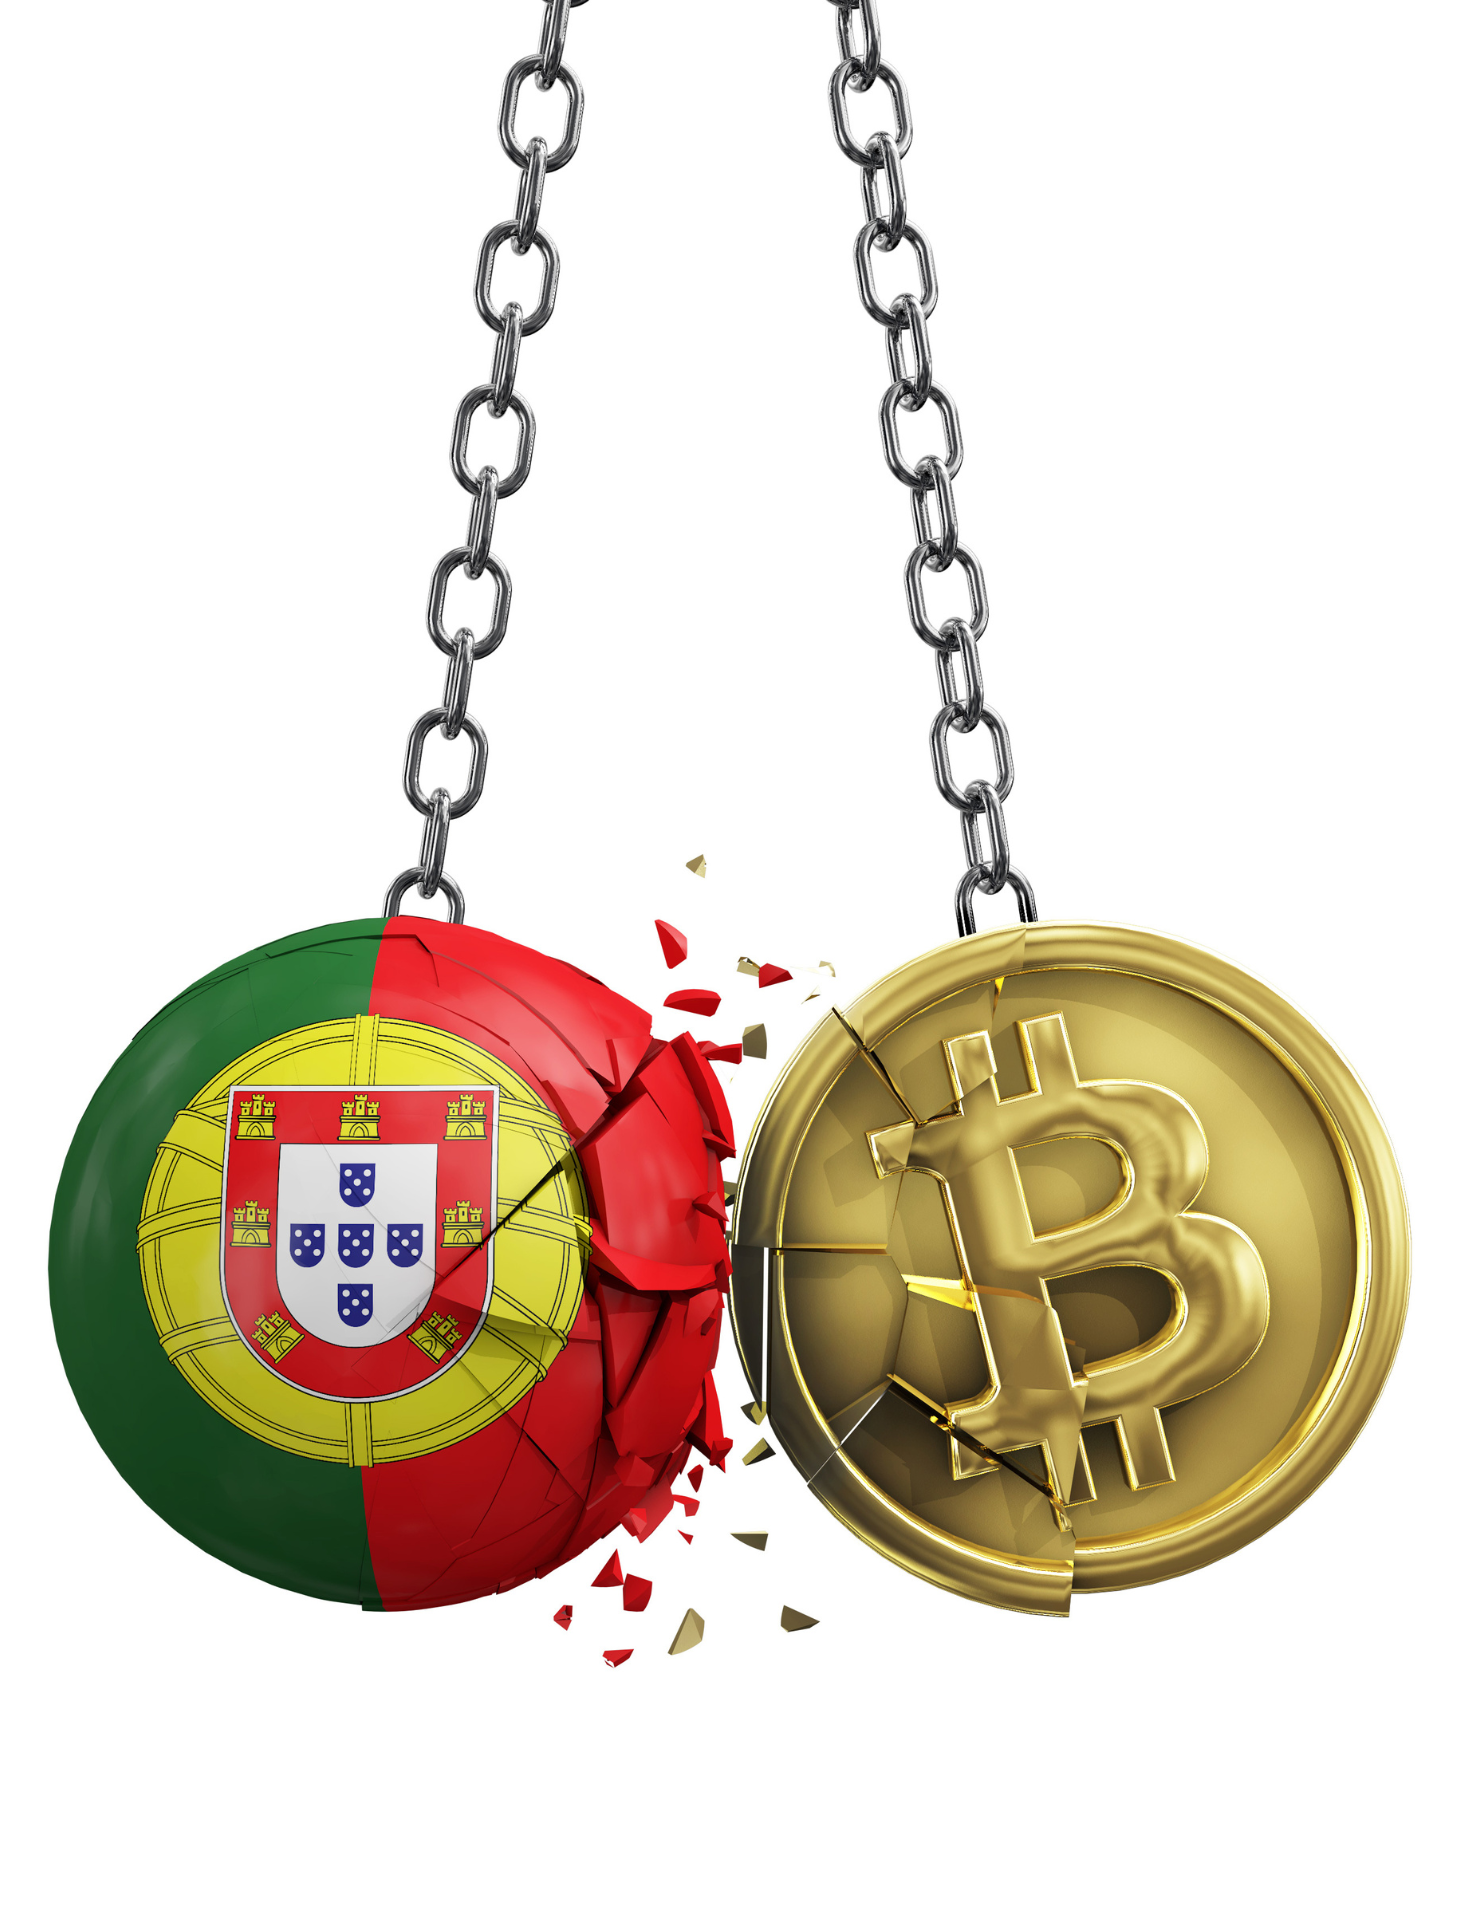 portugal crypto tax laws